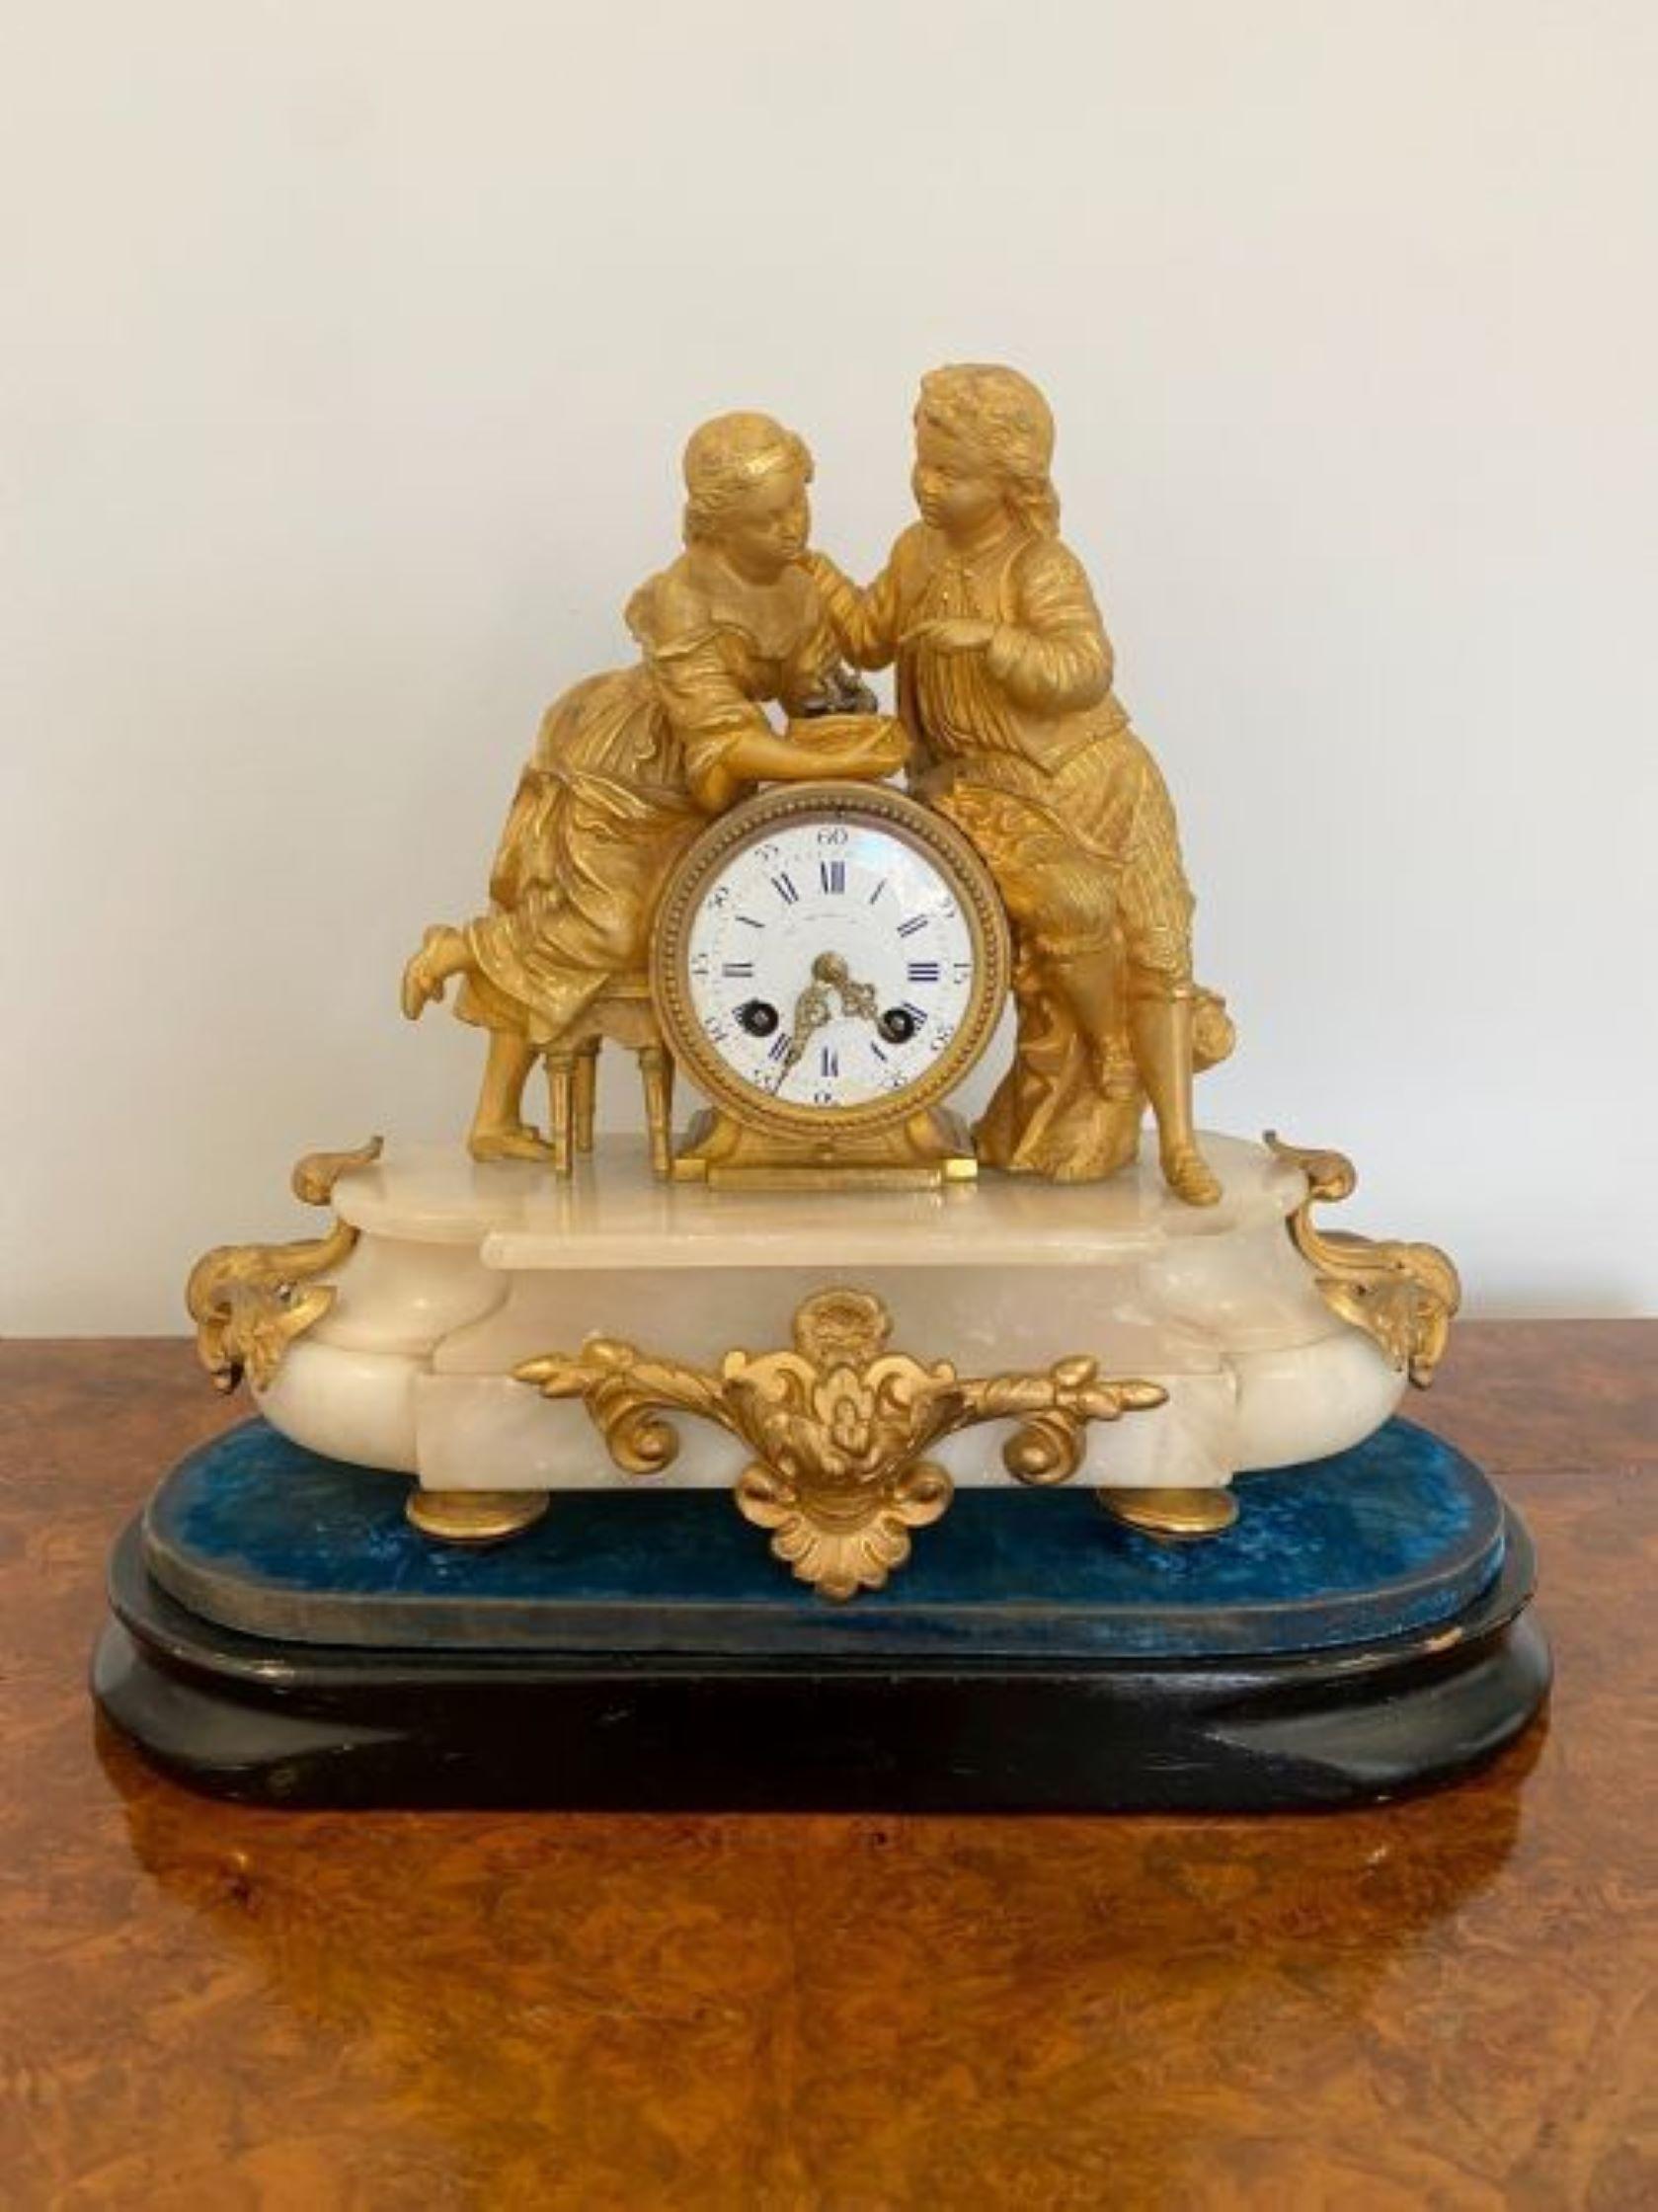 Antique Victorian French ornate ormolu and alabaster mantle clock having a quality pair of ormolu figures holding a birds nest over a circular porcelain dial with original hands, 8 day movement striking the hour and half hour on a bell raised on a